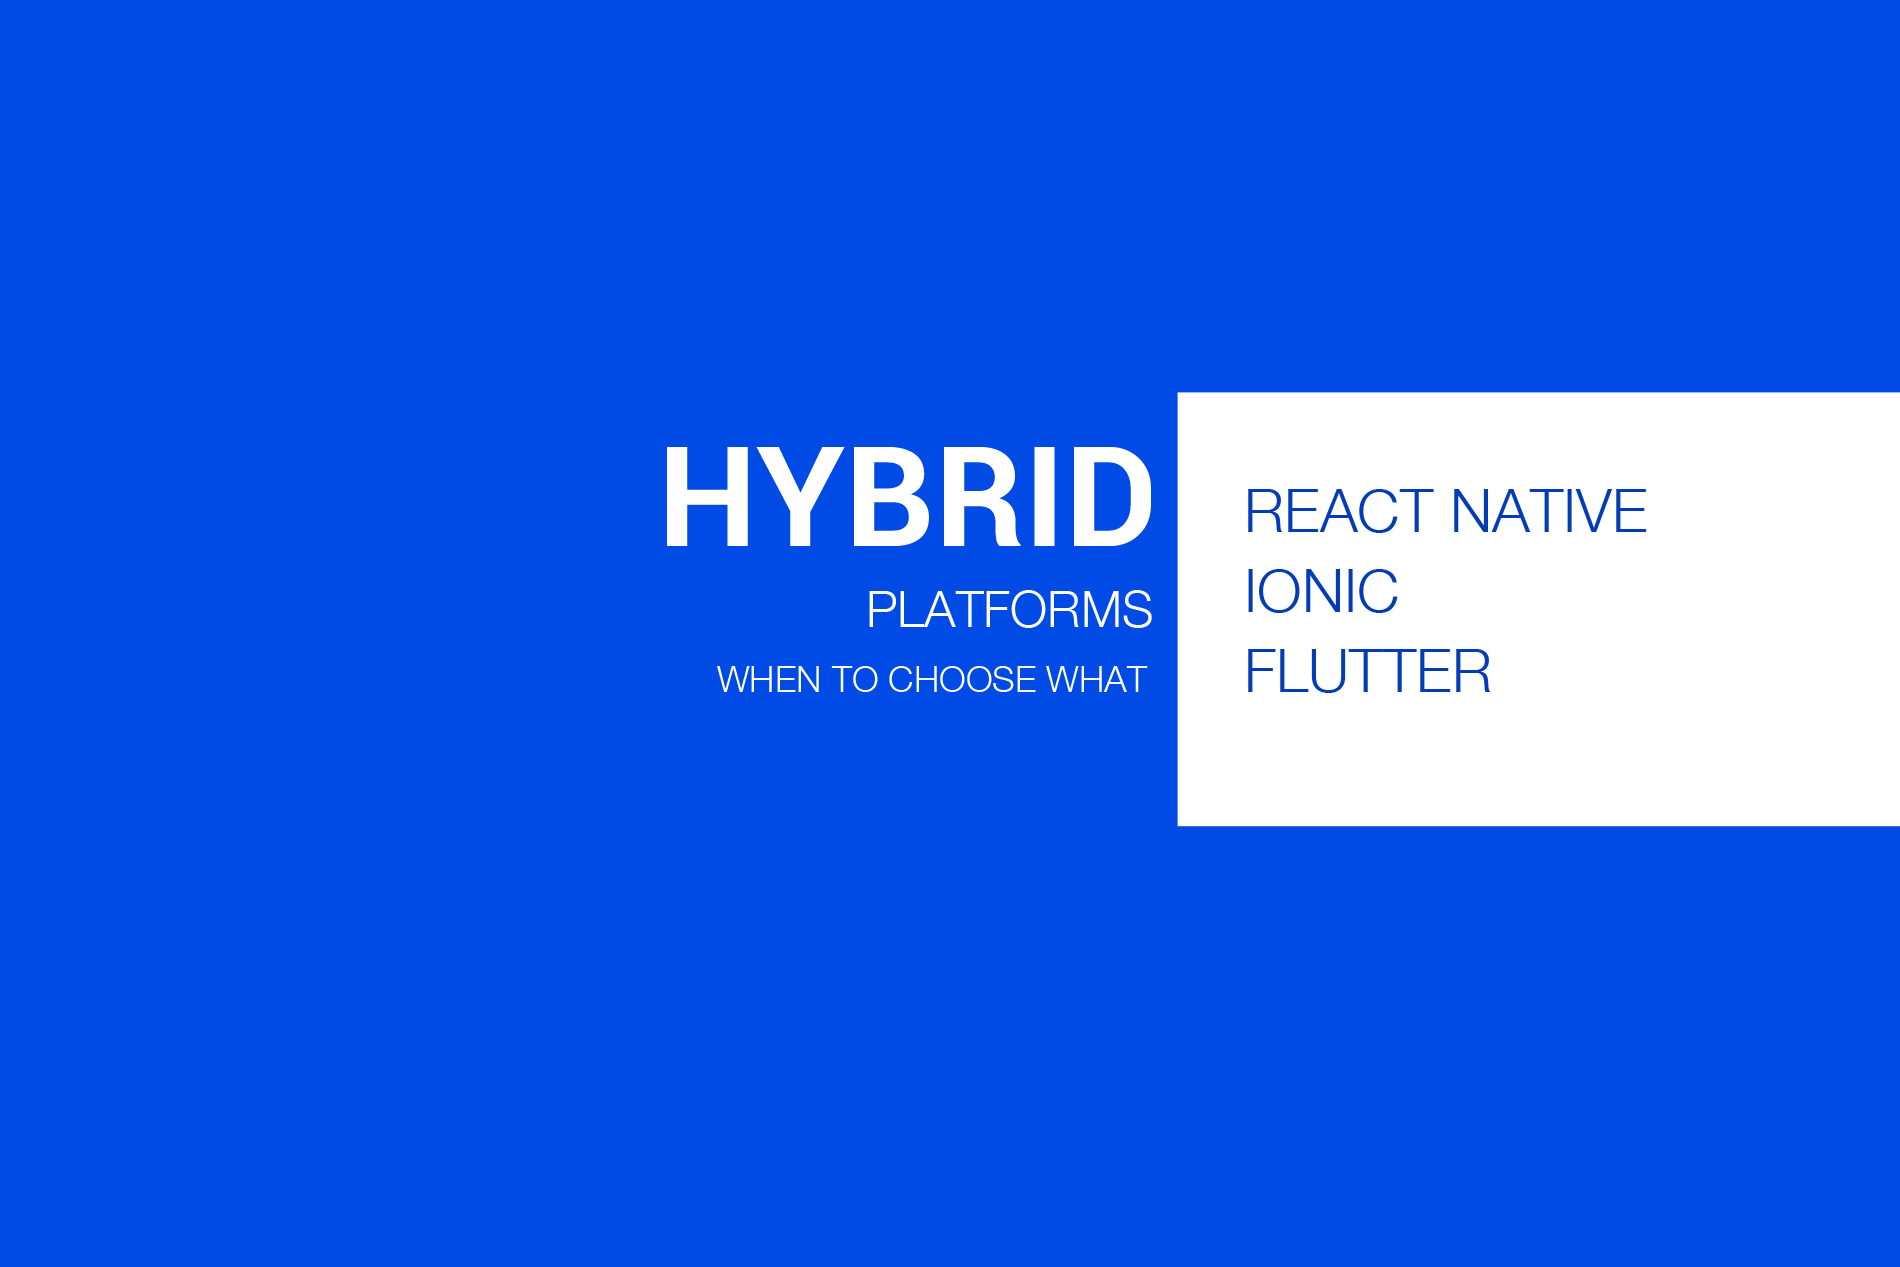 Hybrid Platforms – When to choose what